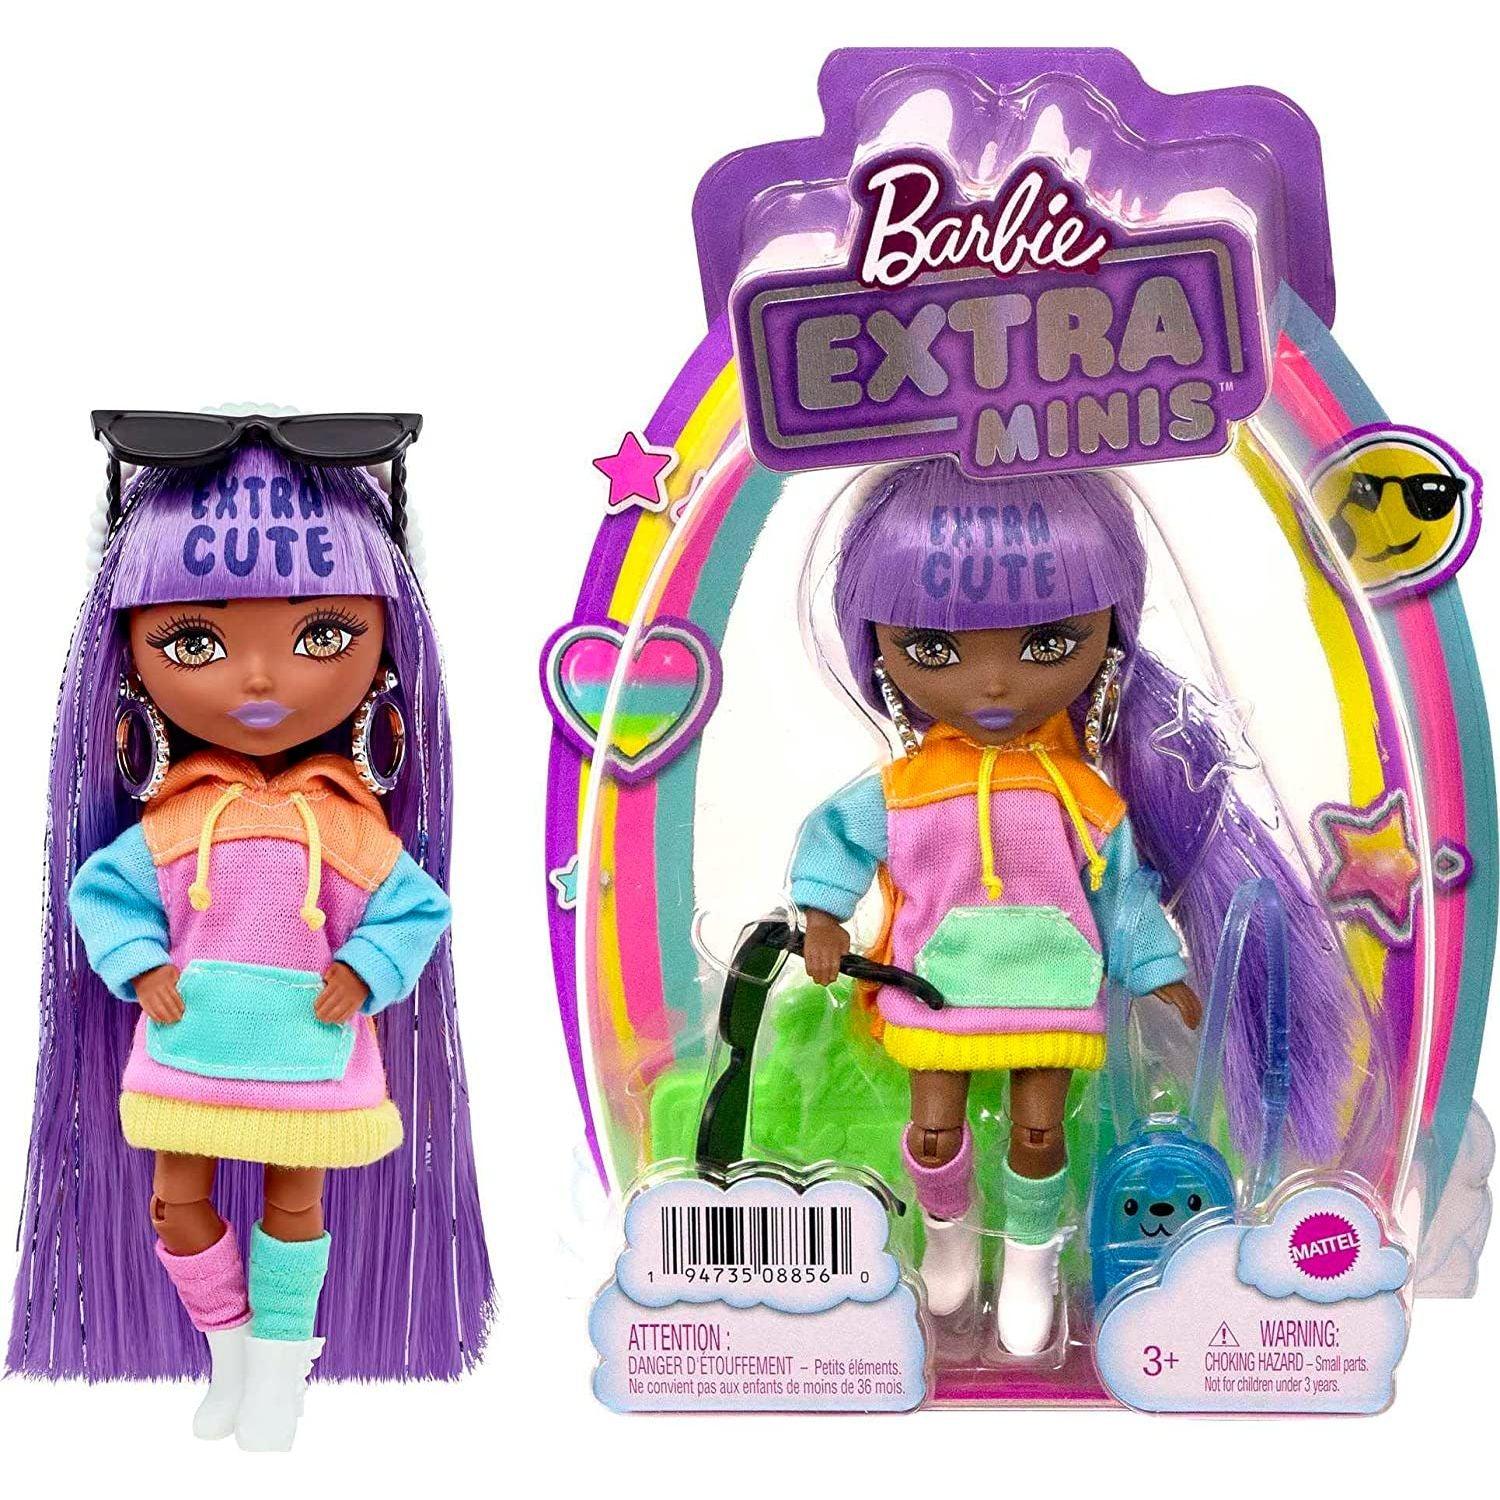 Barbie Extra Minis Doll & Accessories with Purple & Silver Hair, Toy Pieces Include Color-Block Hoodie Dress & Boots - BumbleToys - 5-7 Years, Barbie, Barbie Extra, Dolls, Fashion Dolls & Accessories, Girls, Miniature Dolls & Accessories, OXE, Pre-Order